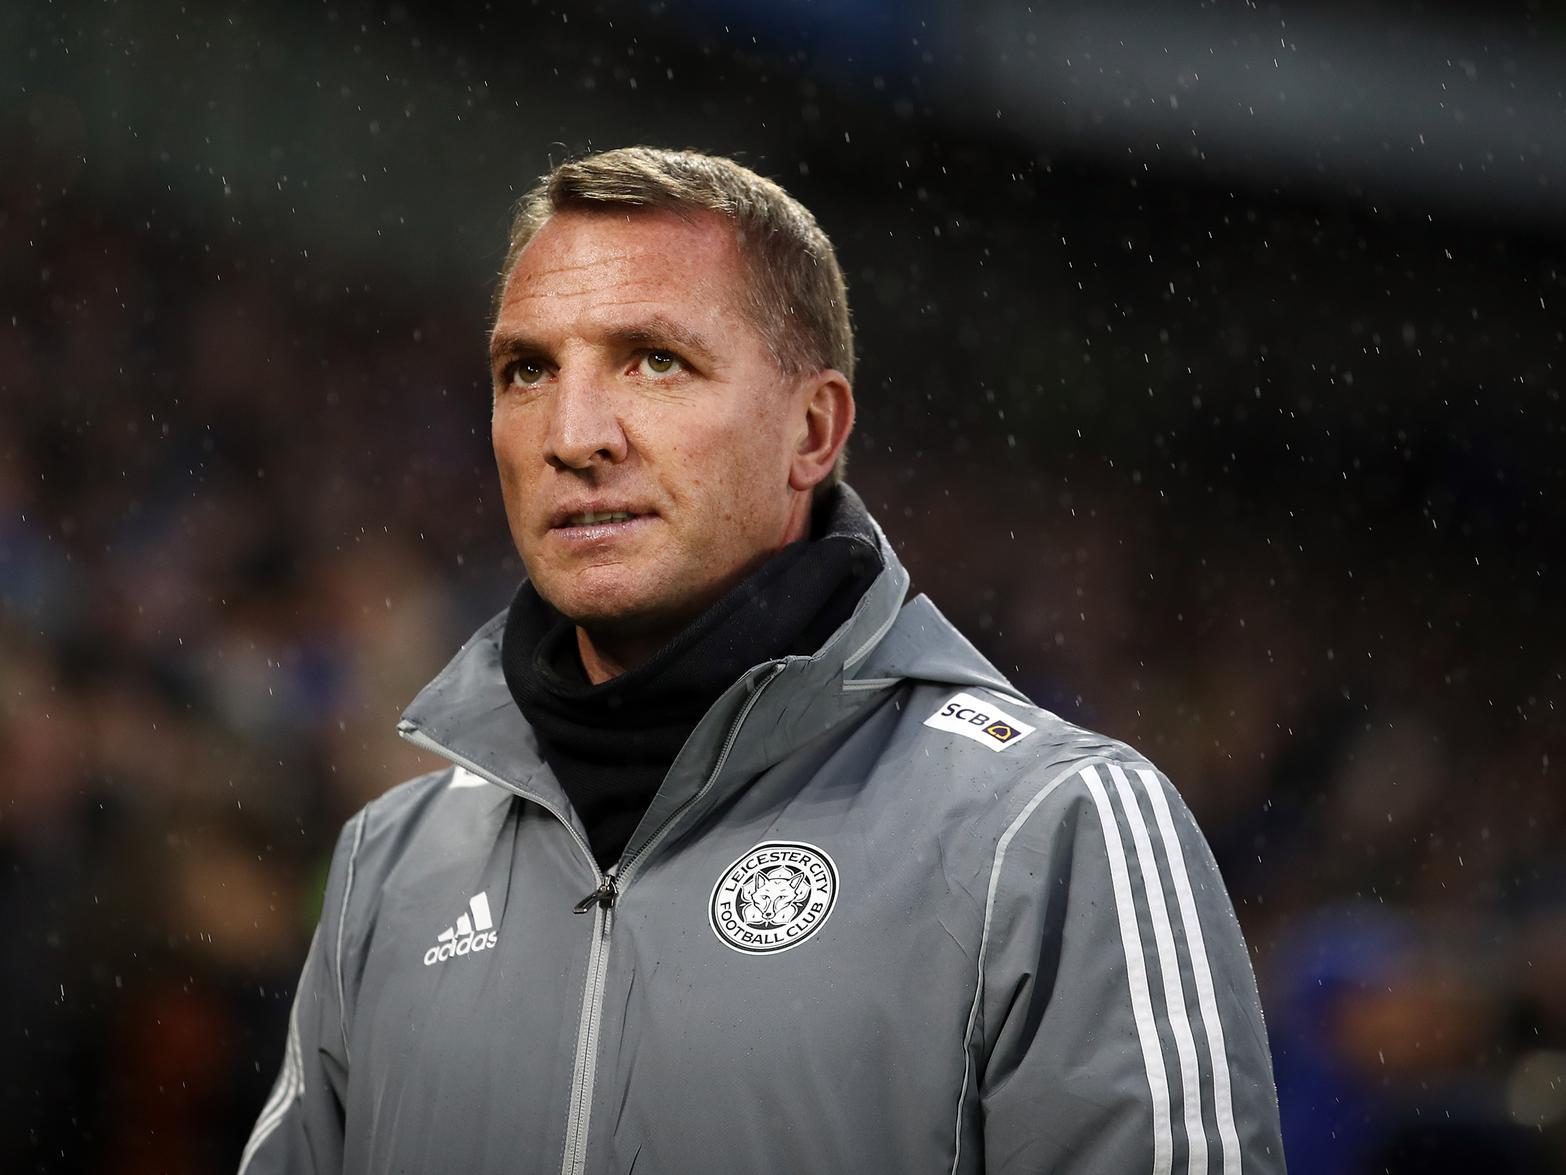 Arsenal may wait until the summer to land their top managerial target Brendan Rodgers, but the Leicester boss regards the Gunners post as his dream job. (Star on Sunday)